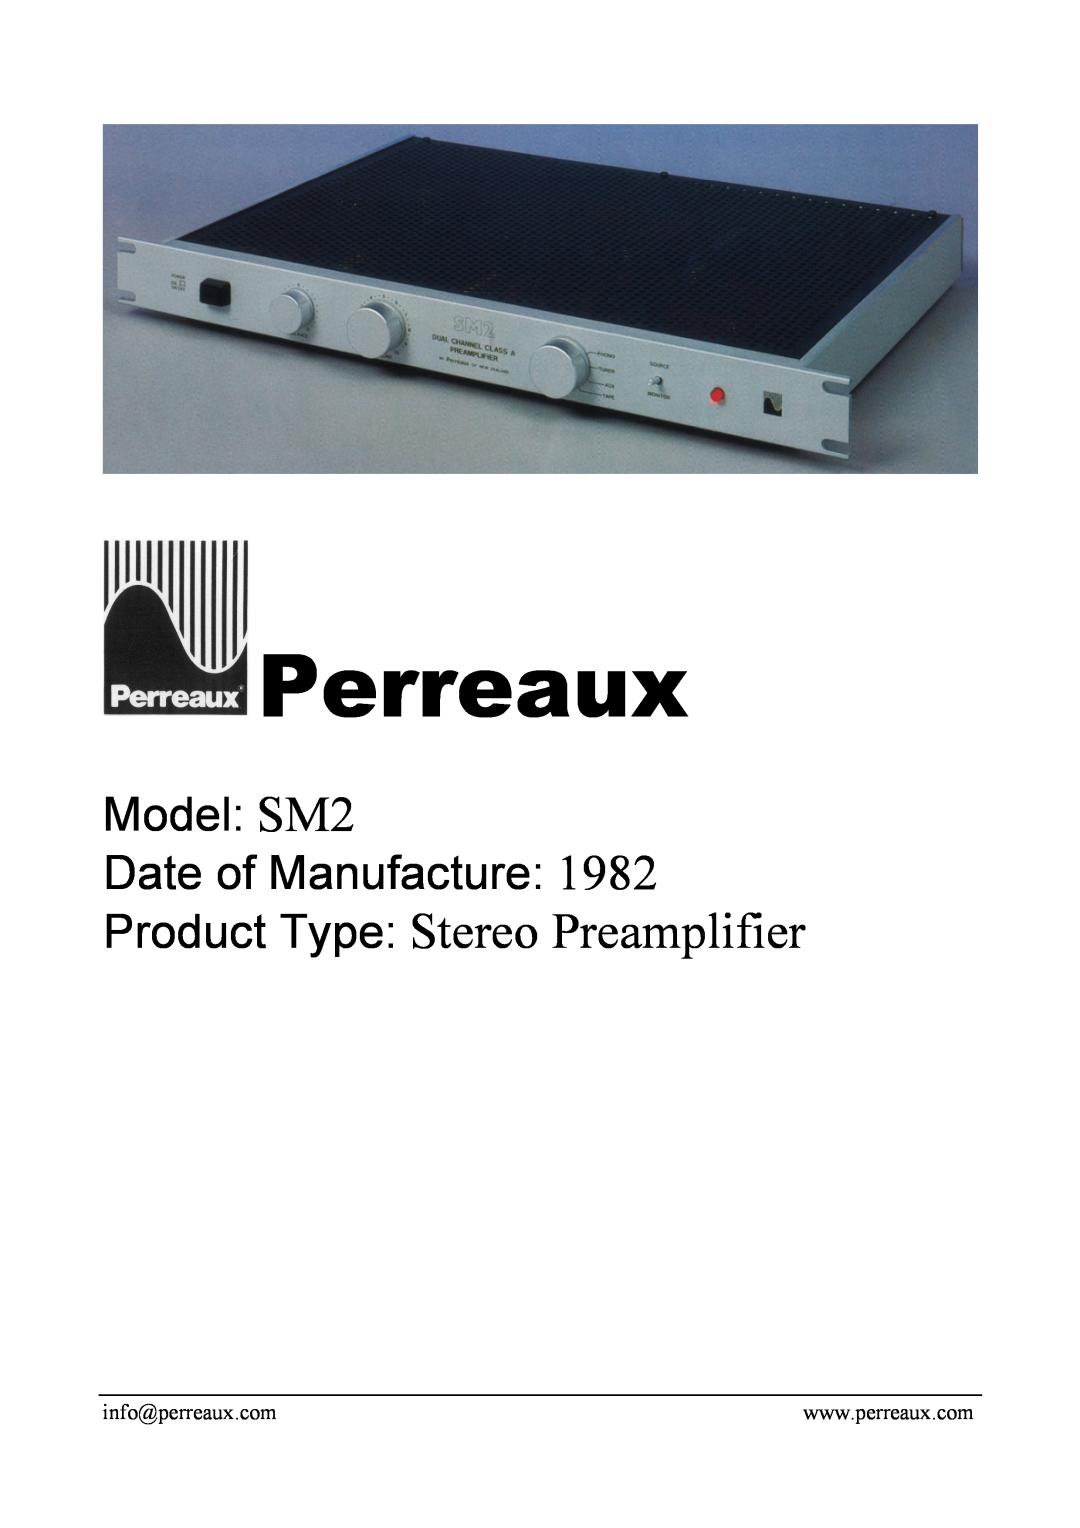 Perreaux manual Perreaux, Product Type Stereo Preamplifier, Model SM2 Date of Manufacture 